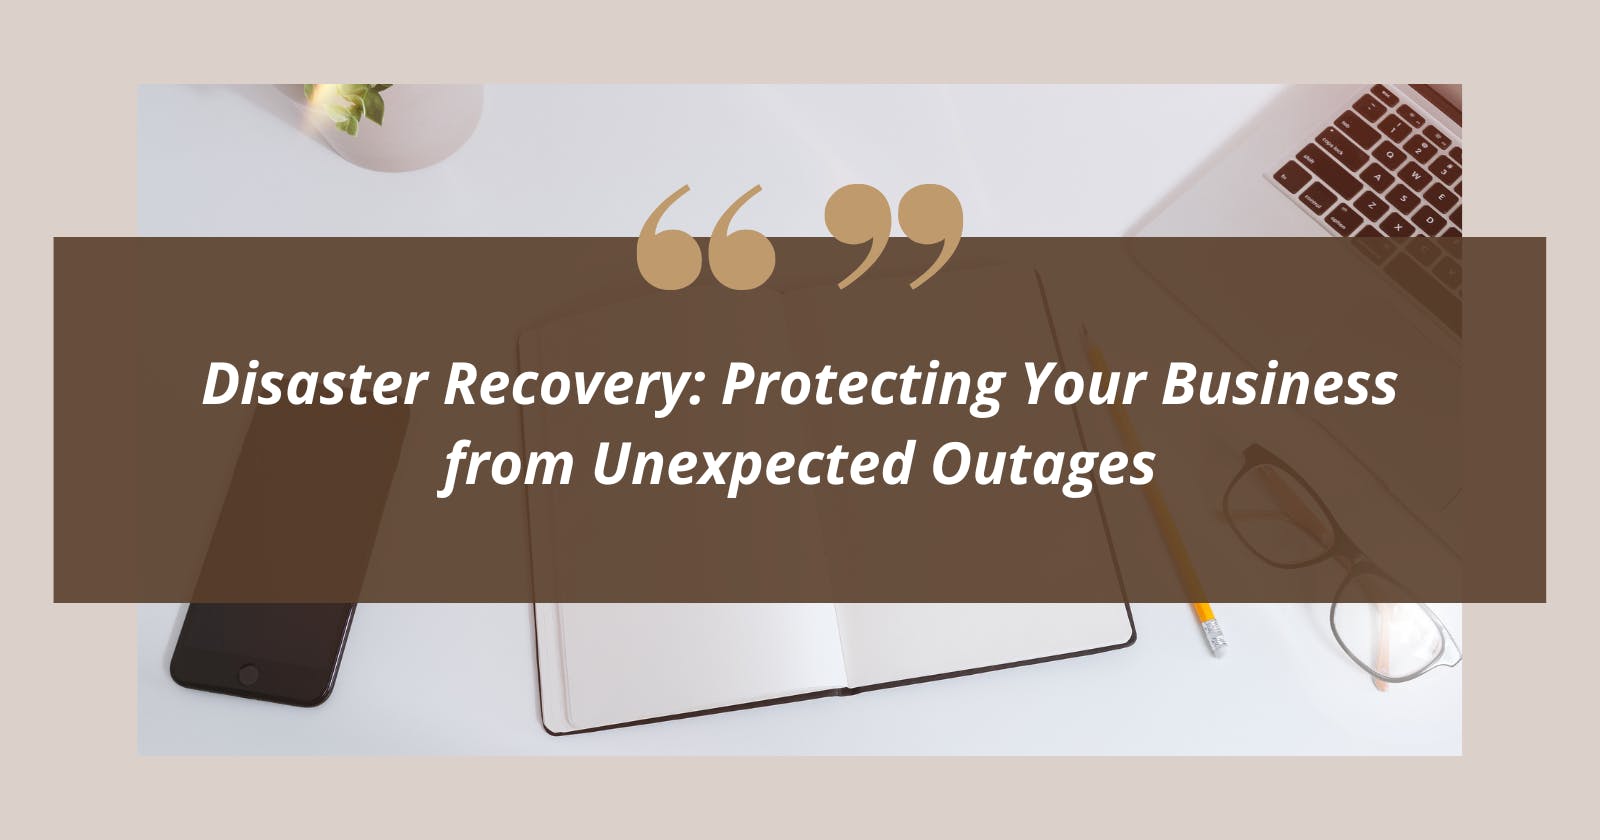 Disaster Recovery: Protecting Your Business from Unexpected Outages